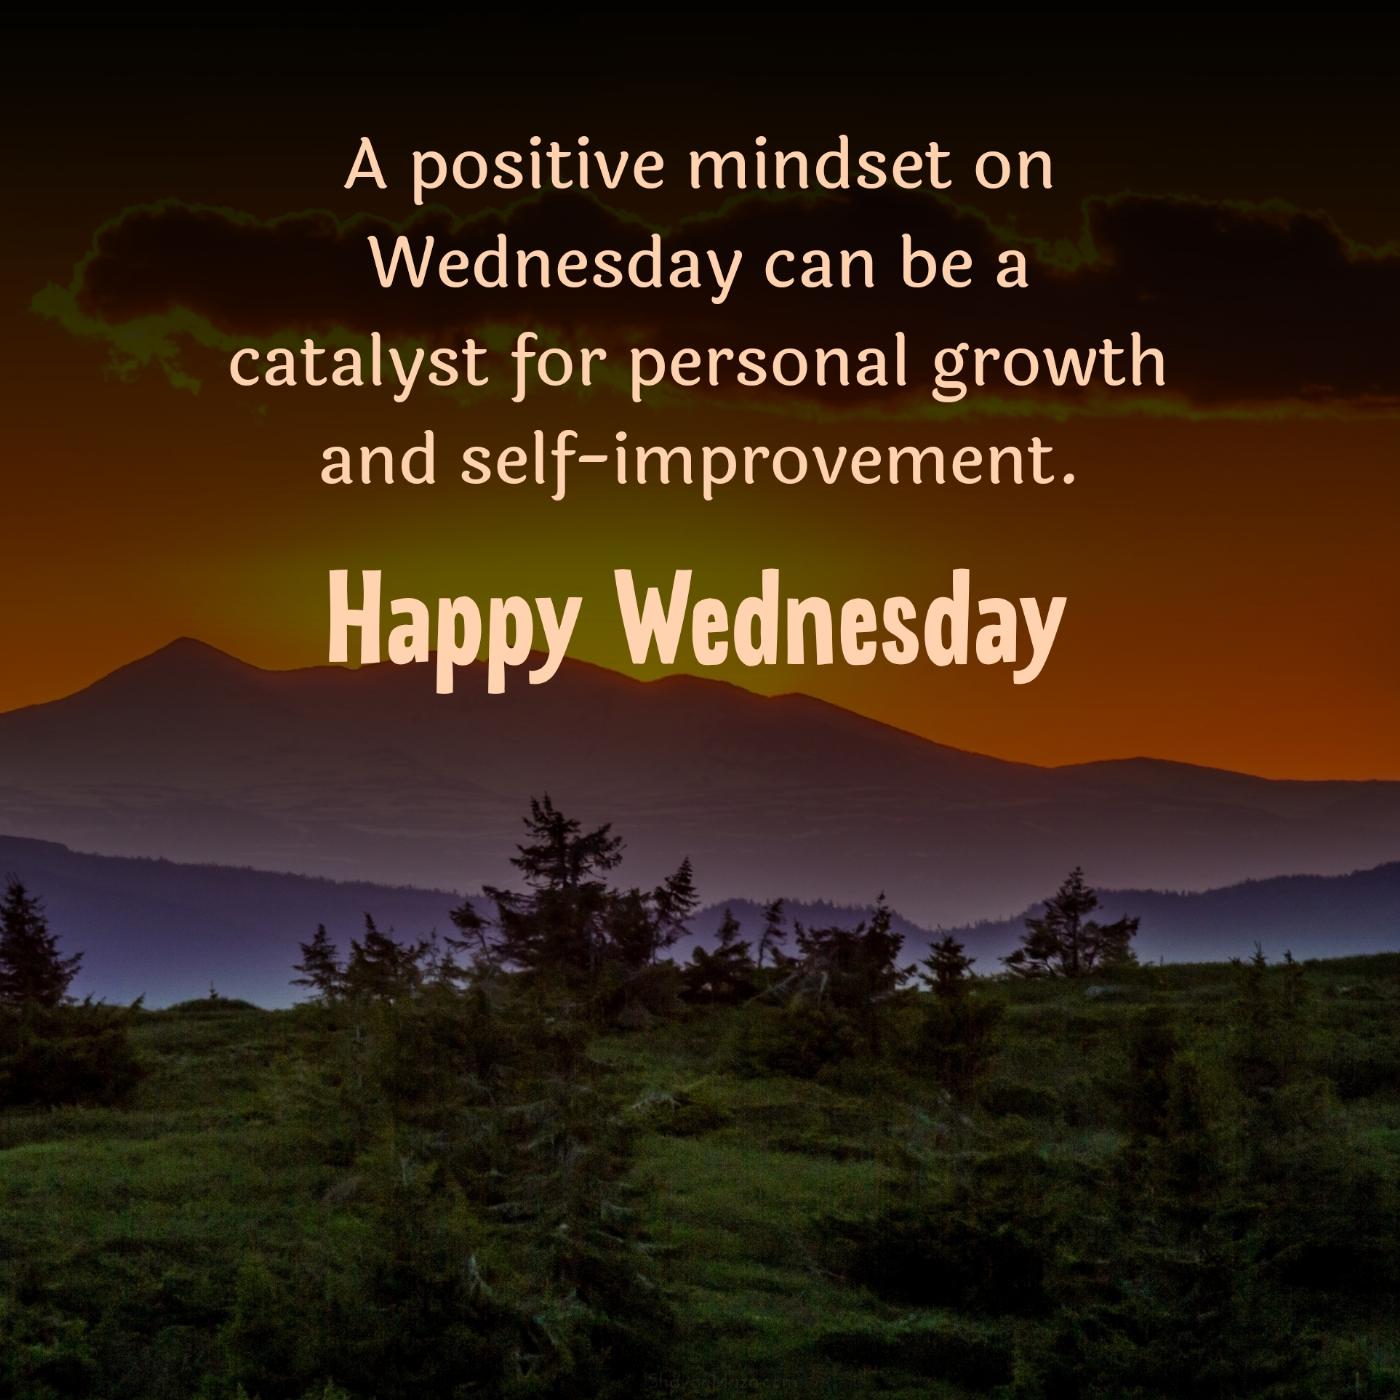 A positive mindset on Wednesday can be a catalyst